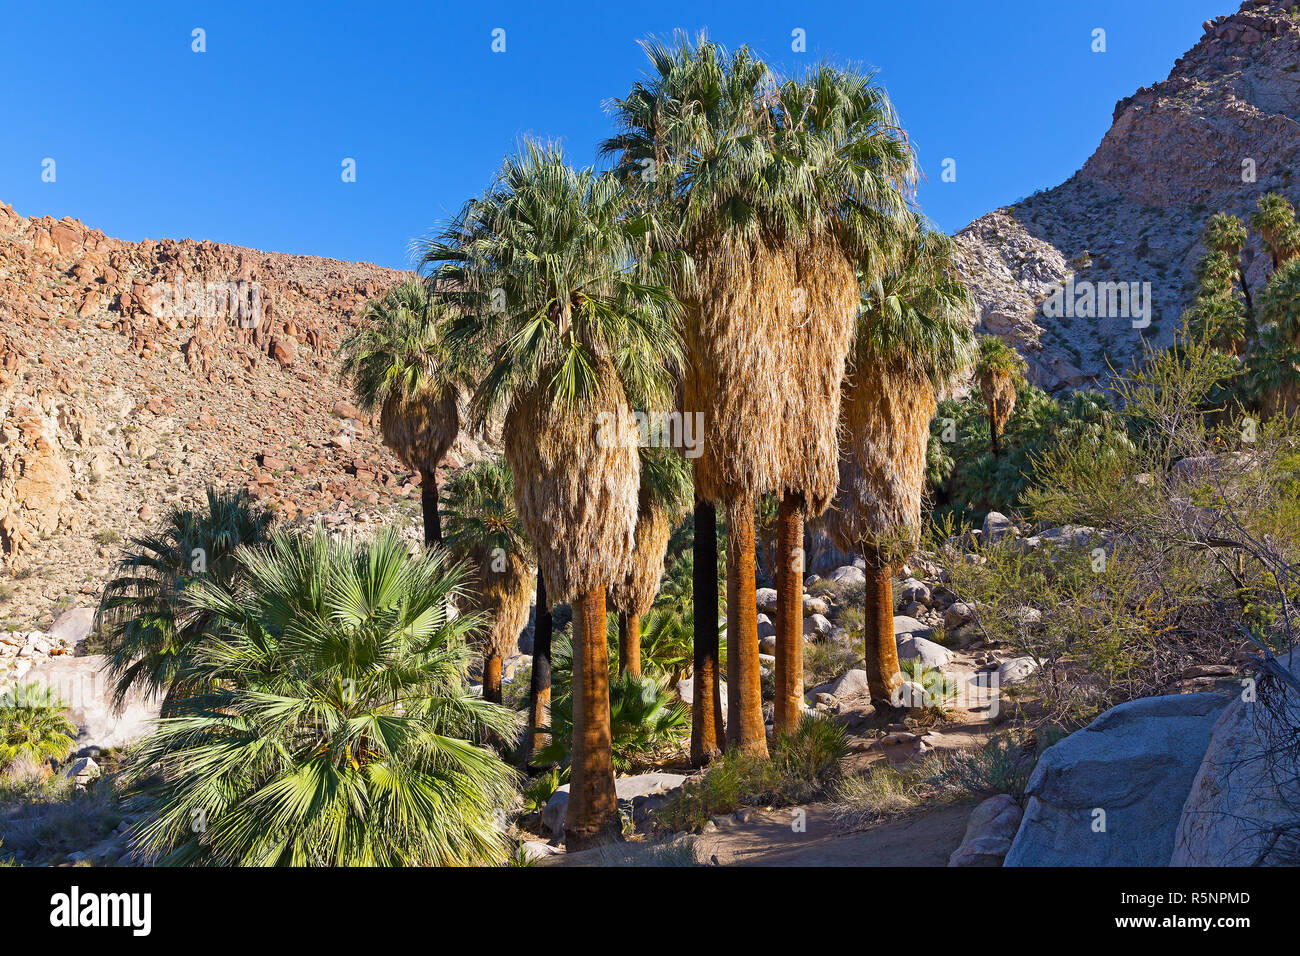 Palm trees in a gorge at the end of park trail. One of the wonders in Joshua Tree National Park, California USA. Stock Photo